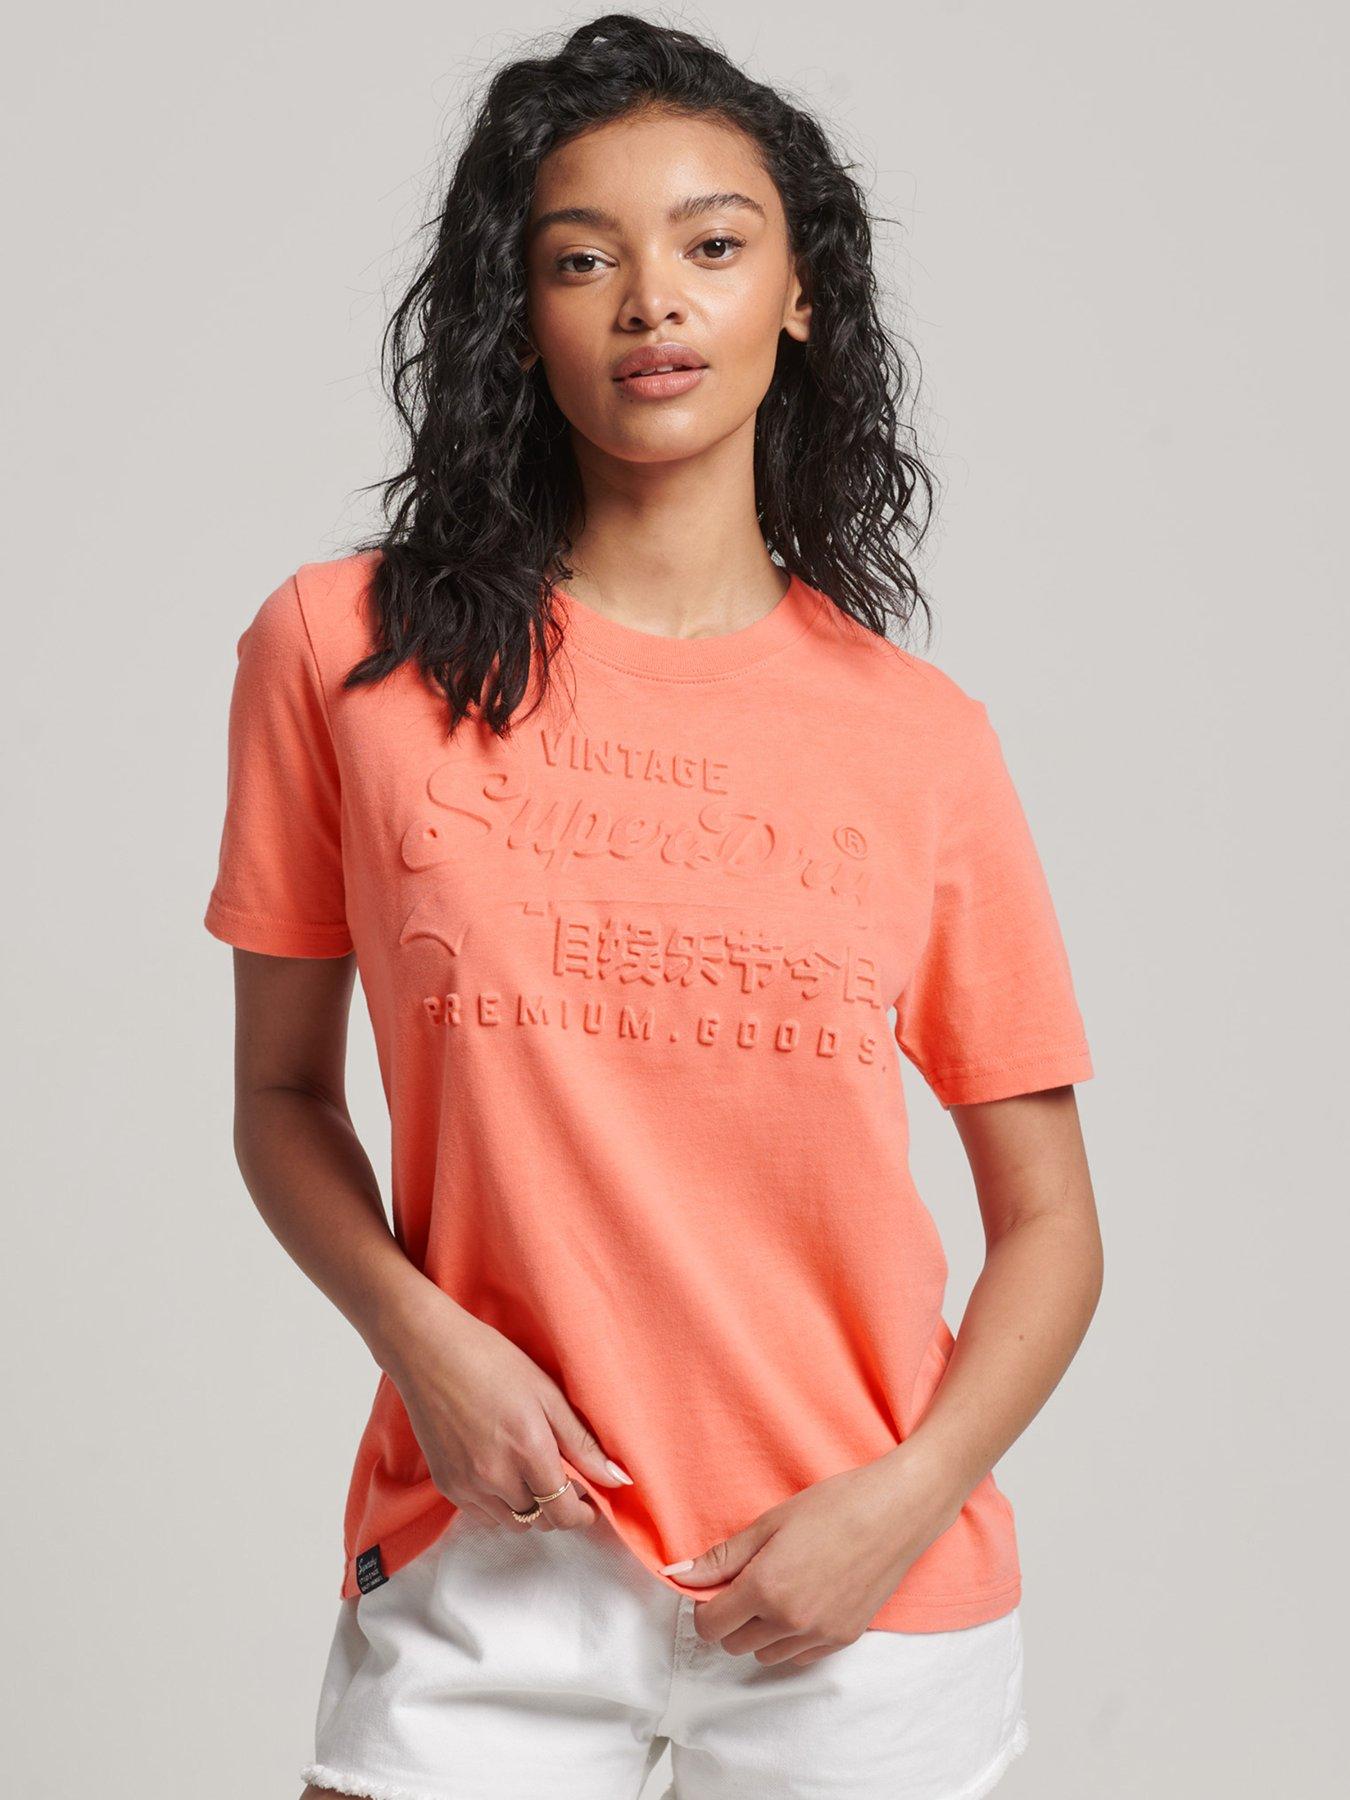 Superdry T-Shirts | Superdry Womens T-Shirts Very.co.uk